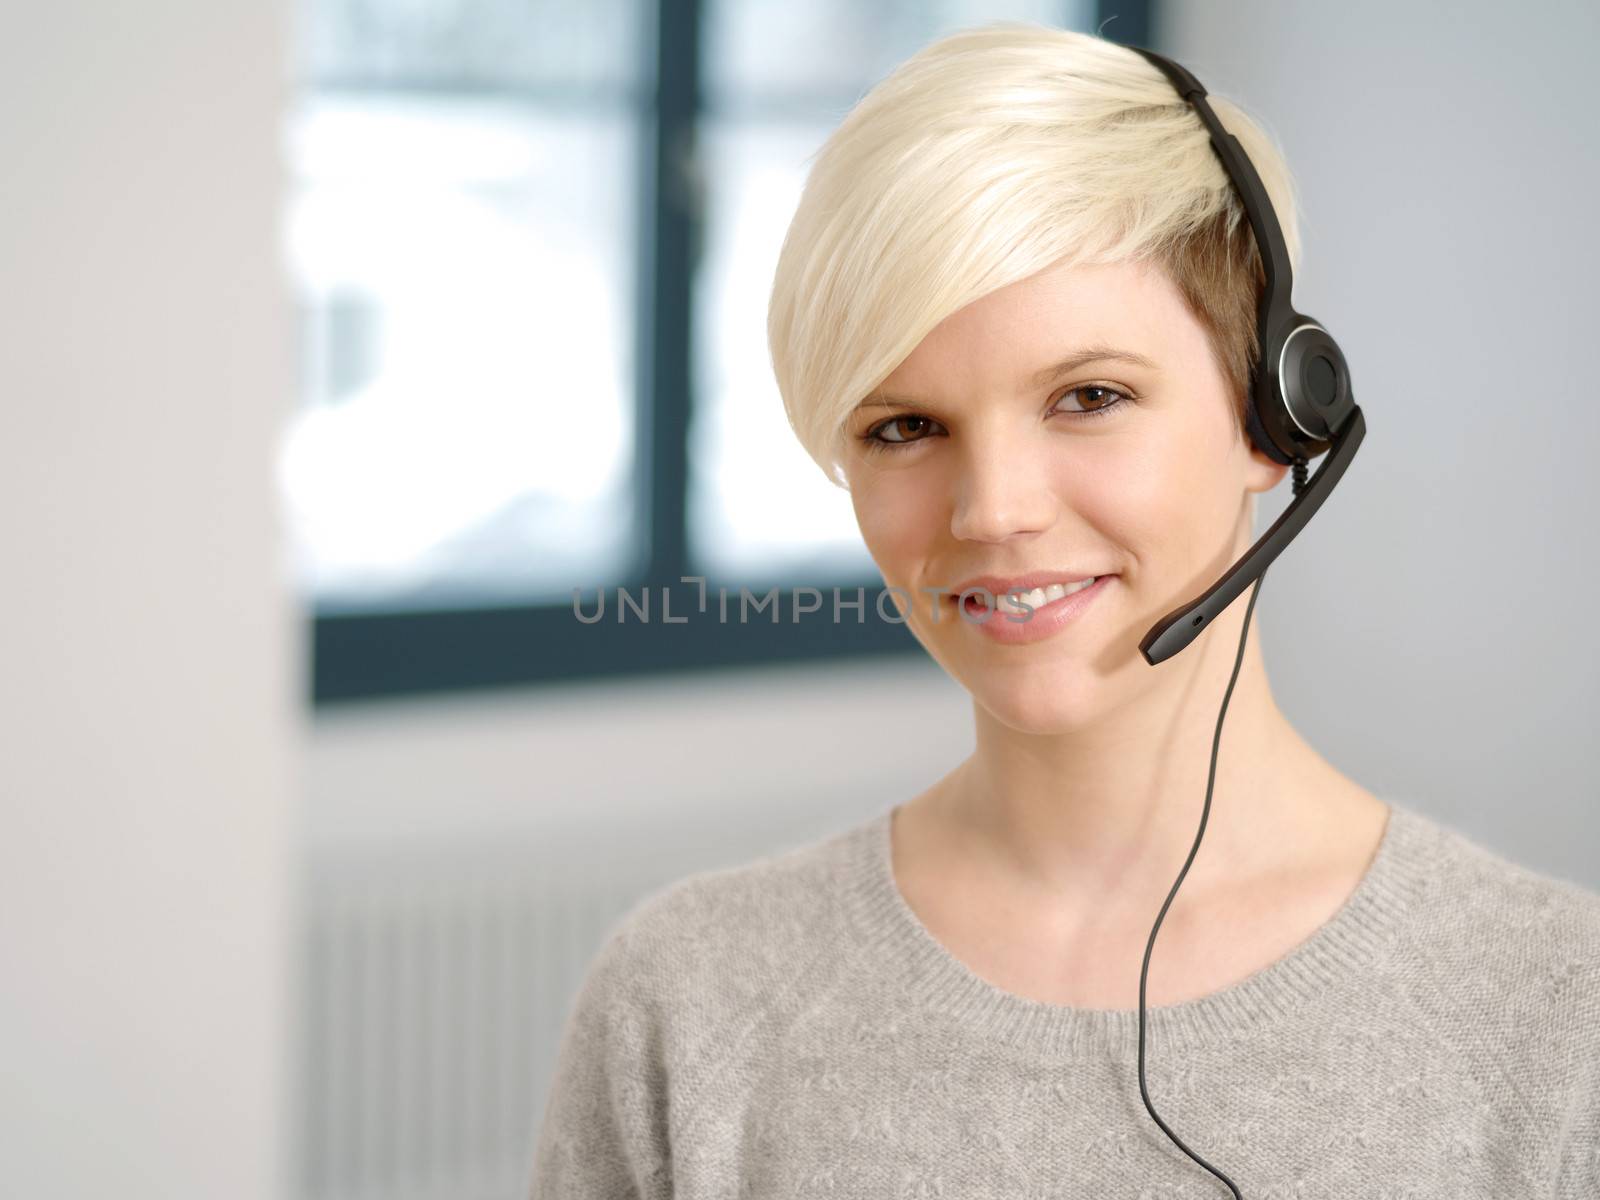 Photo of a cute young call center female with short blond hair and big smile wearing a headset.